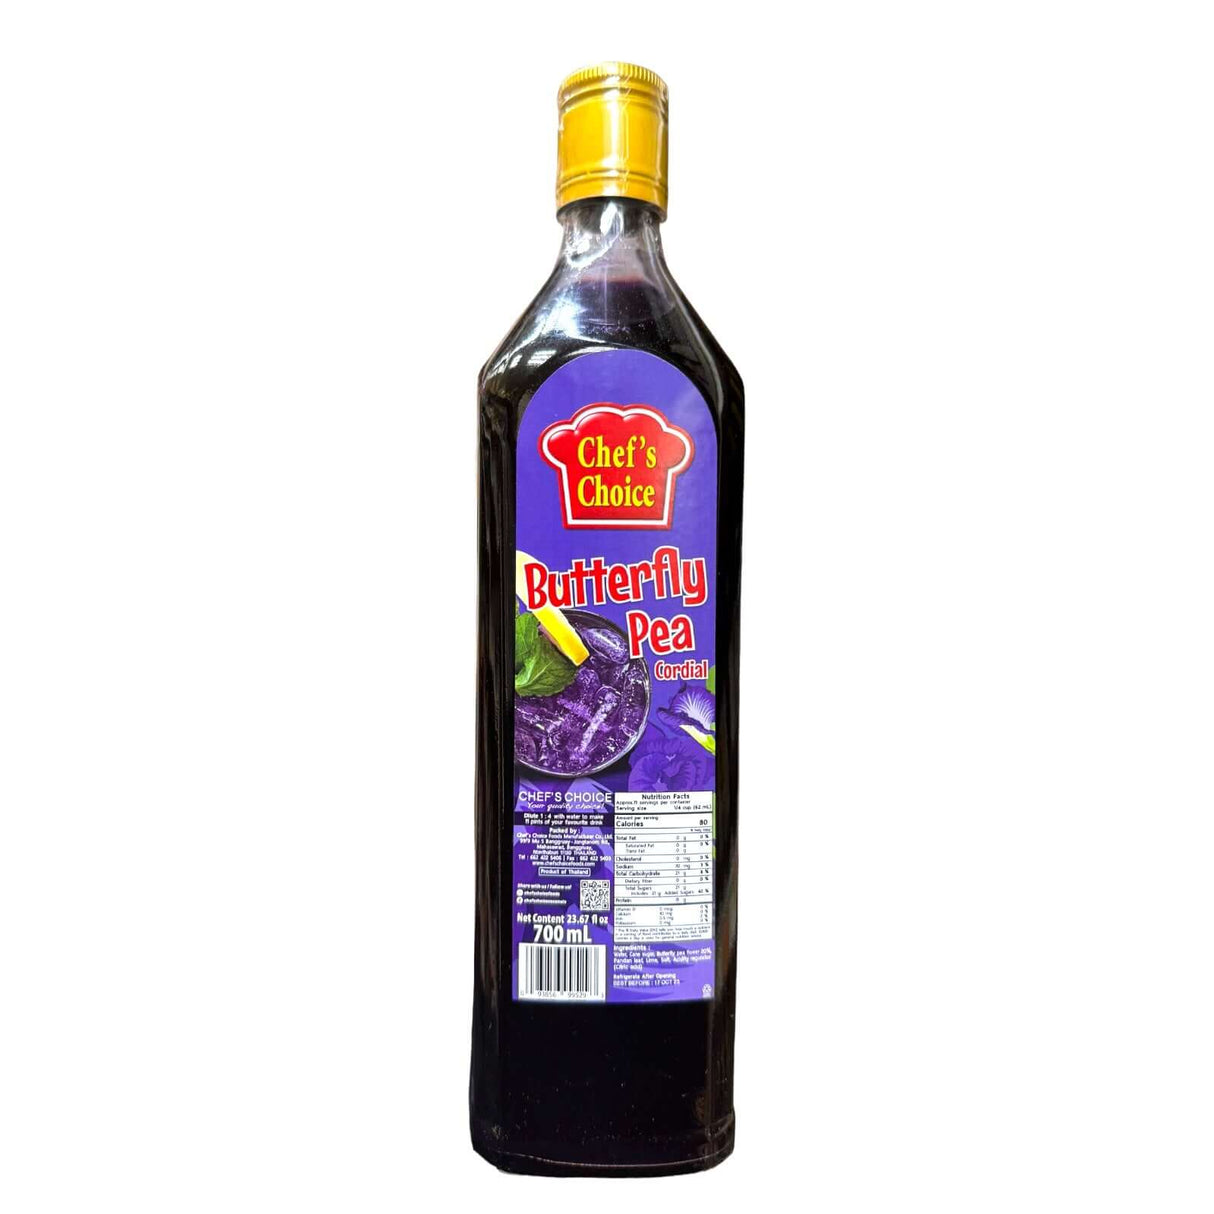 Chef's Choice Butterfly Pea Cordial